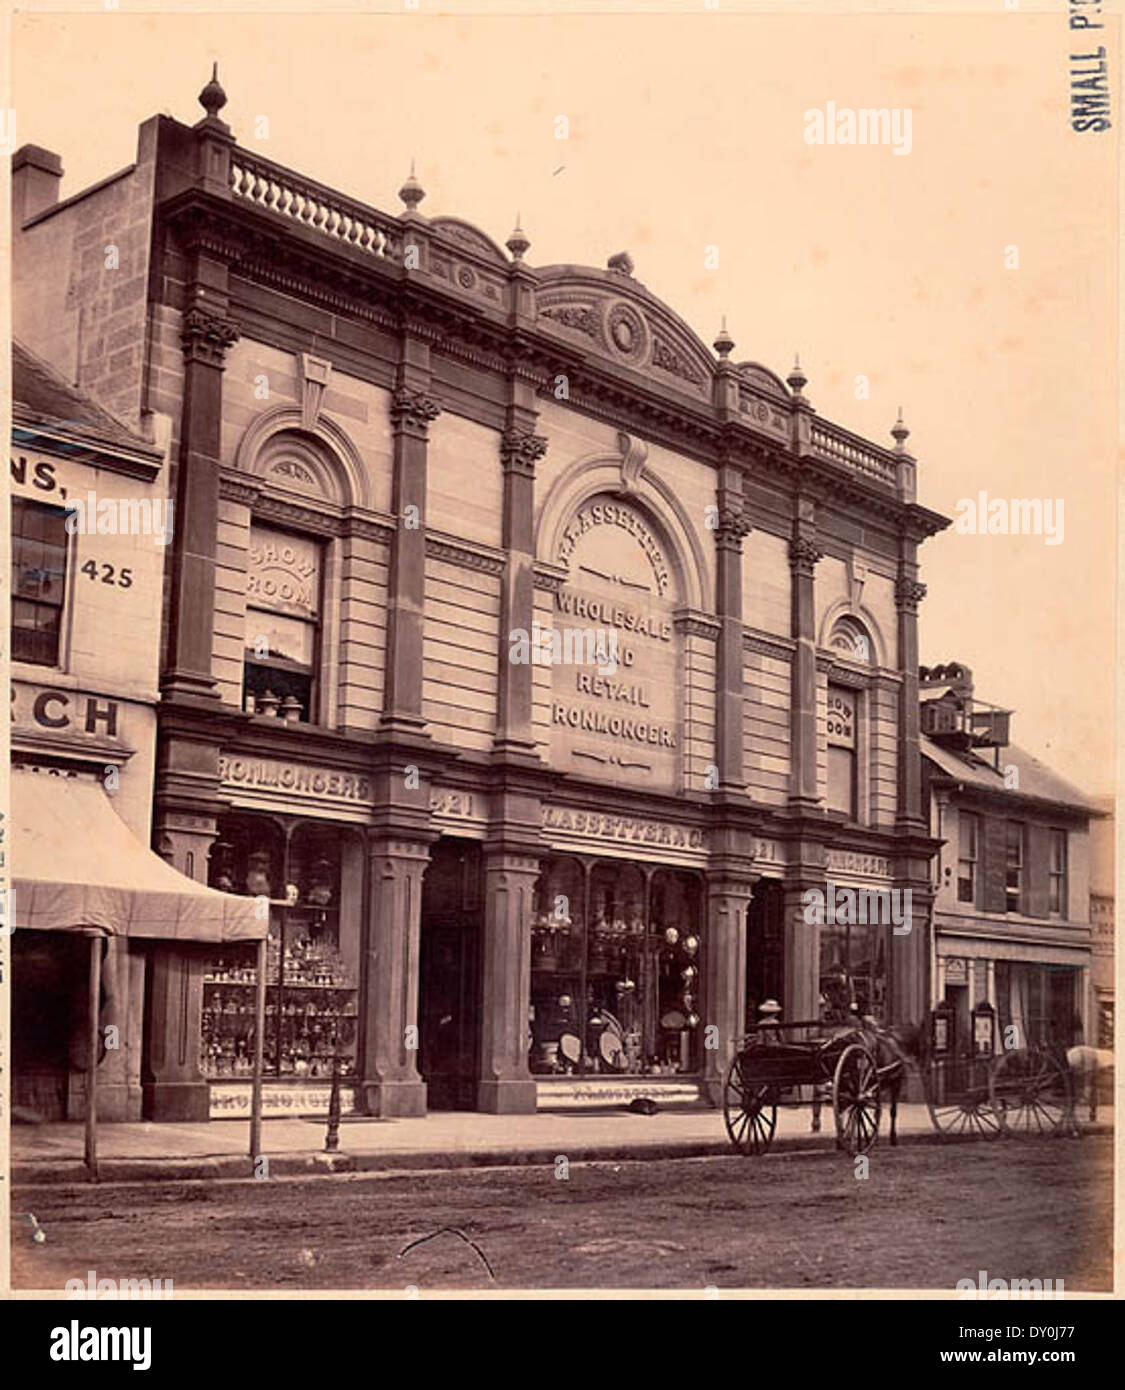 Lassetter & Co., wholesale and retail ironmonger, 421 George Street, Sydney, 1870, attributed to Charles Pickering Stock Photo